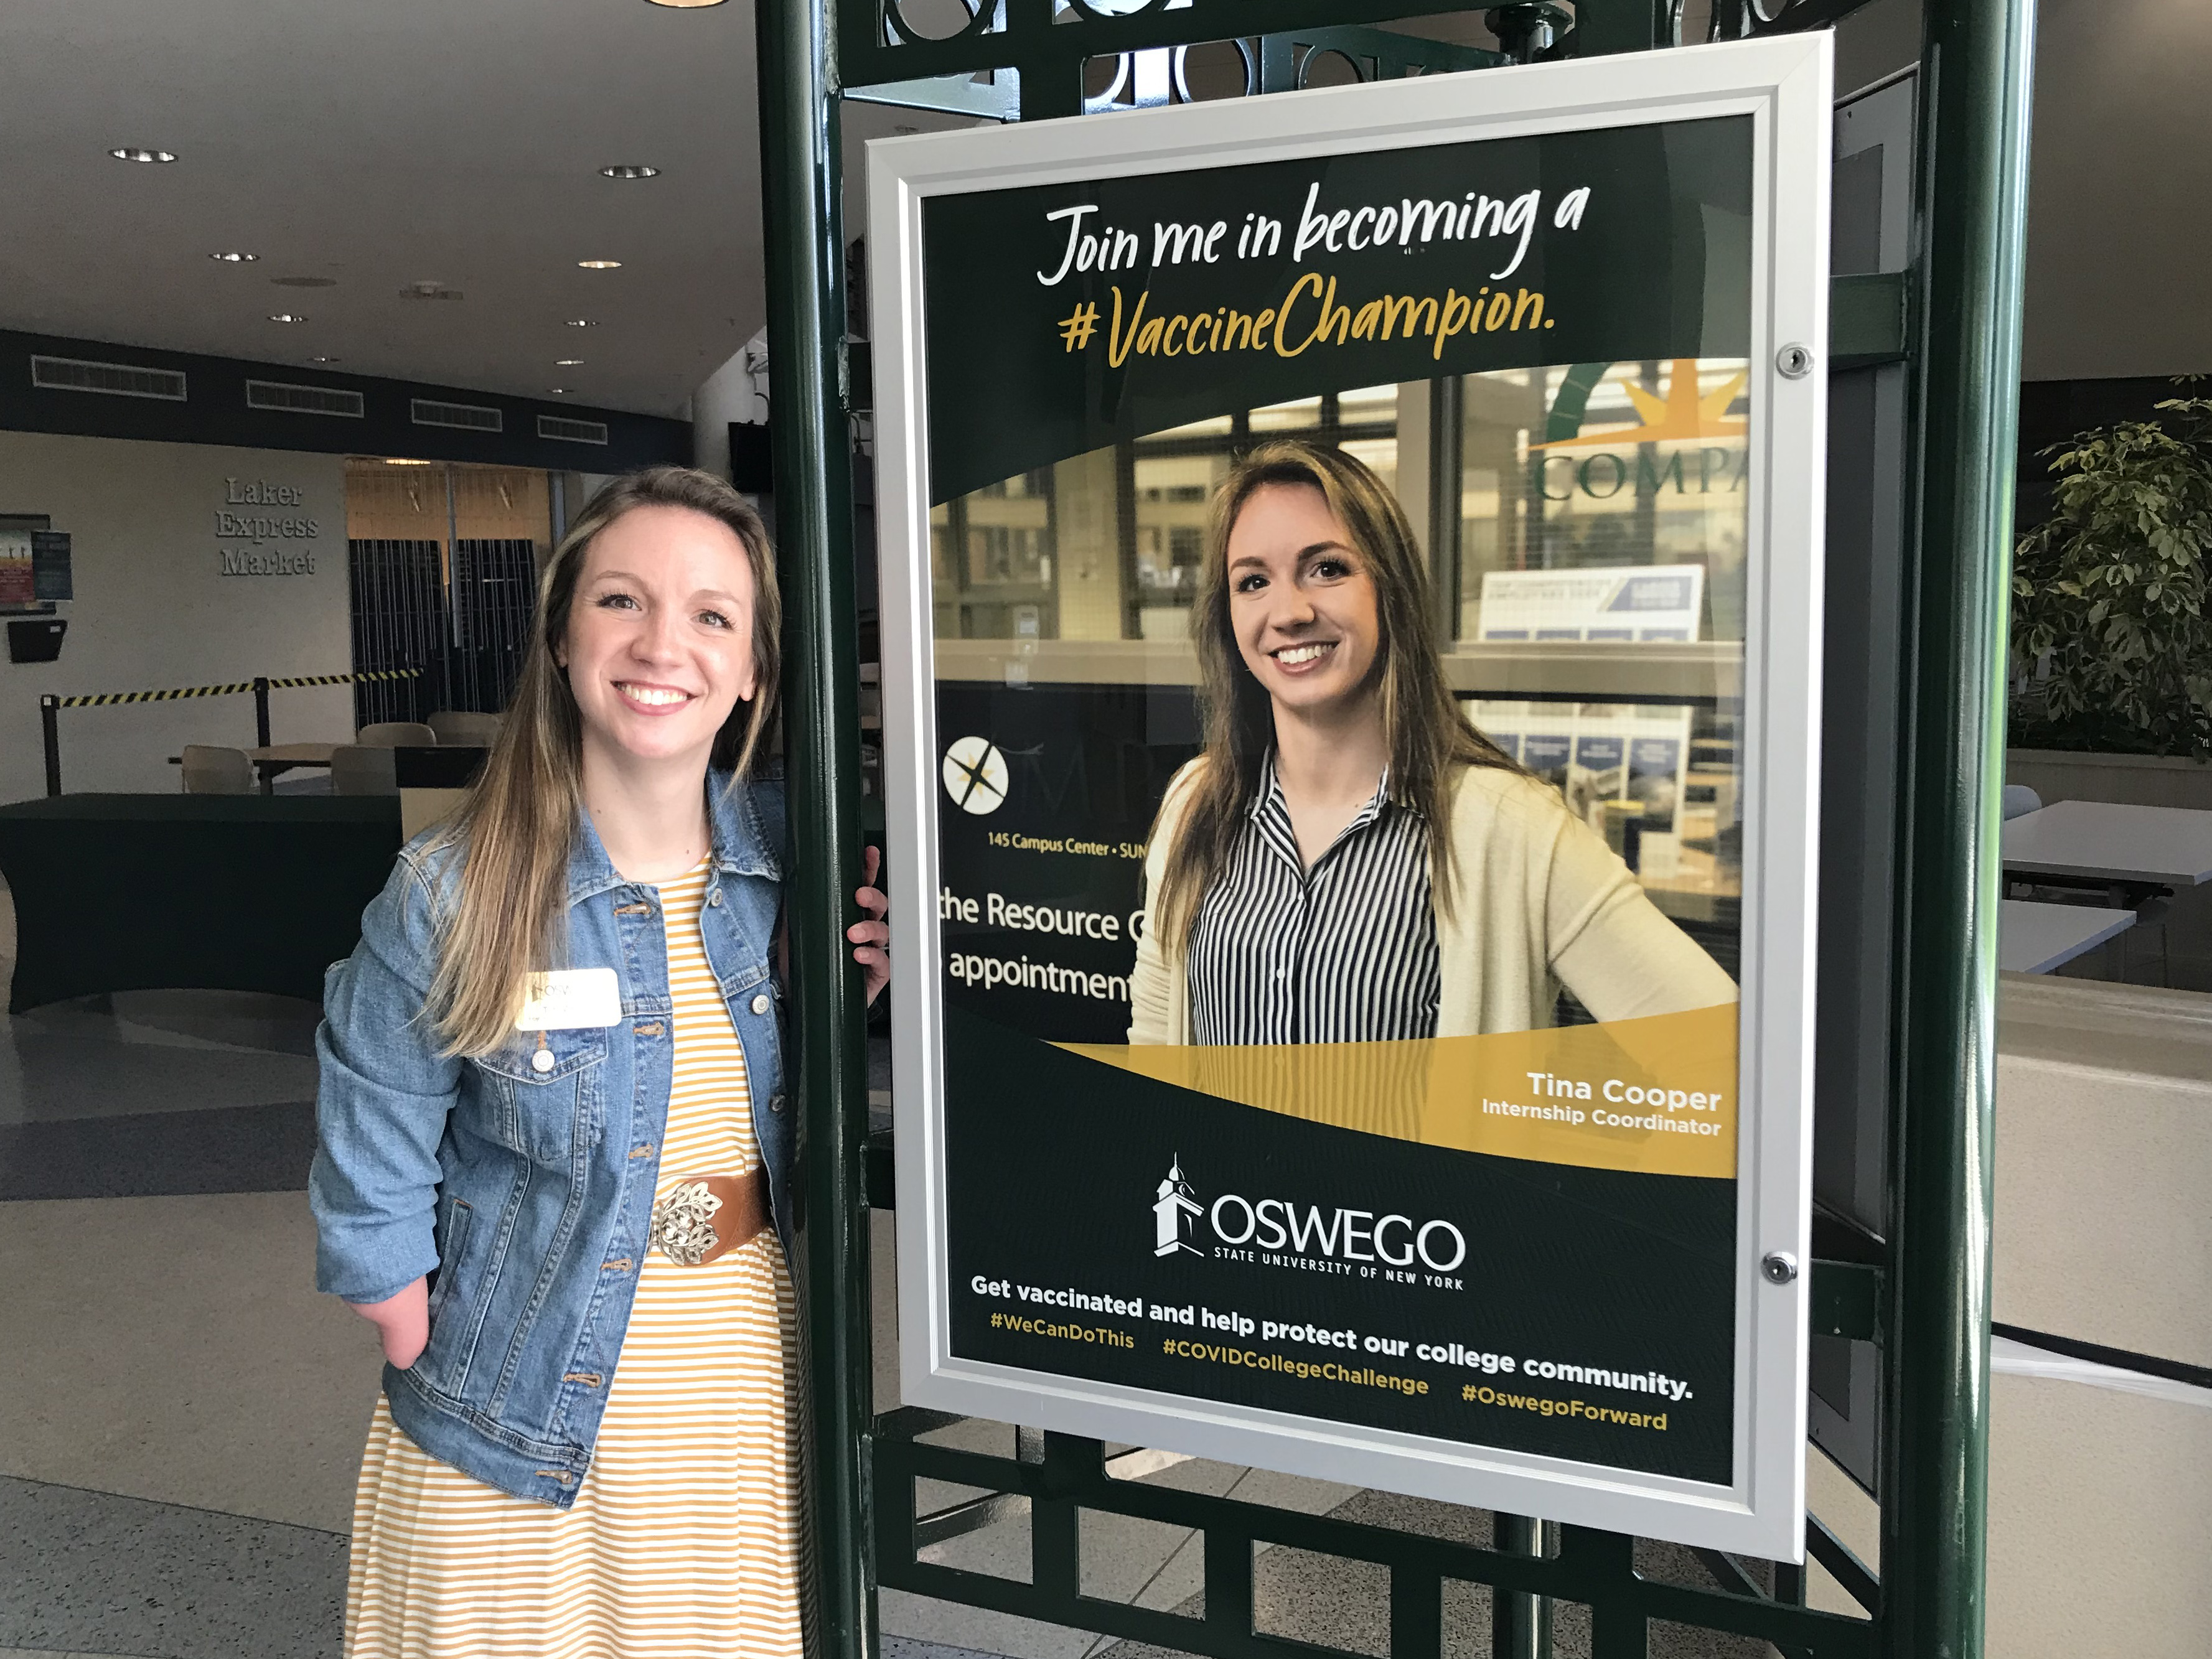 Tina Cooper, the college’s internship coordinator, poses next to a poster of her promoting SUNY Oswego joining the College Vaccine Champion Challenge, a national effort to increase vaccination rates for the benefit of public health